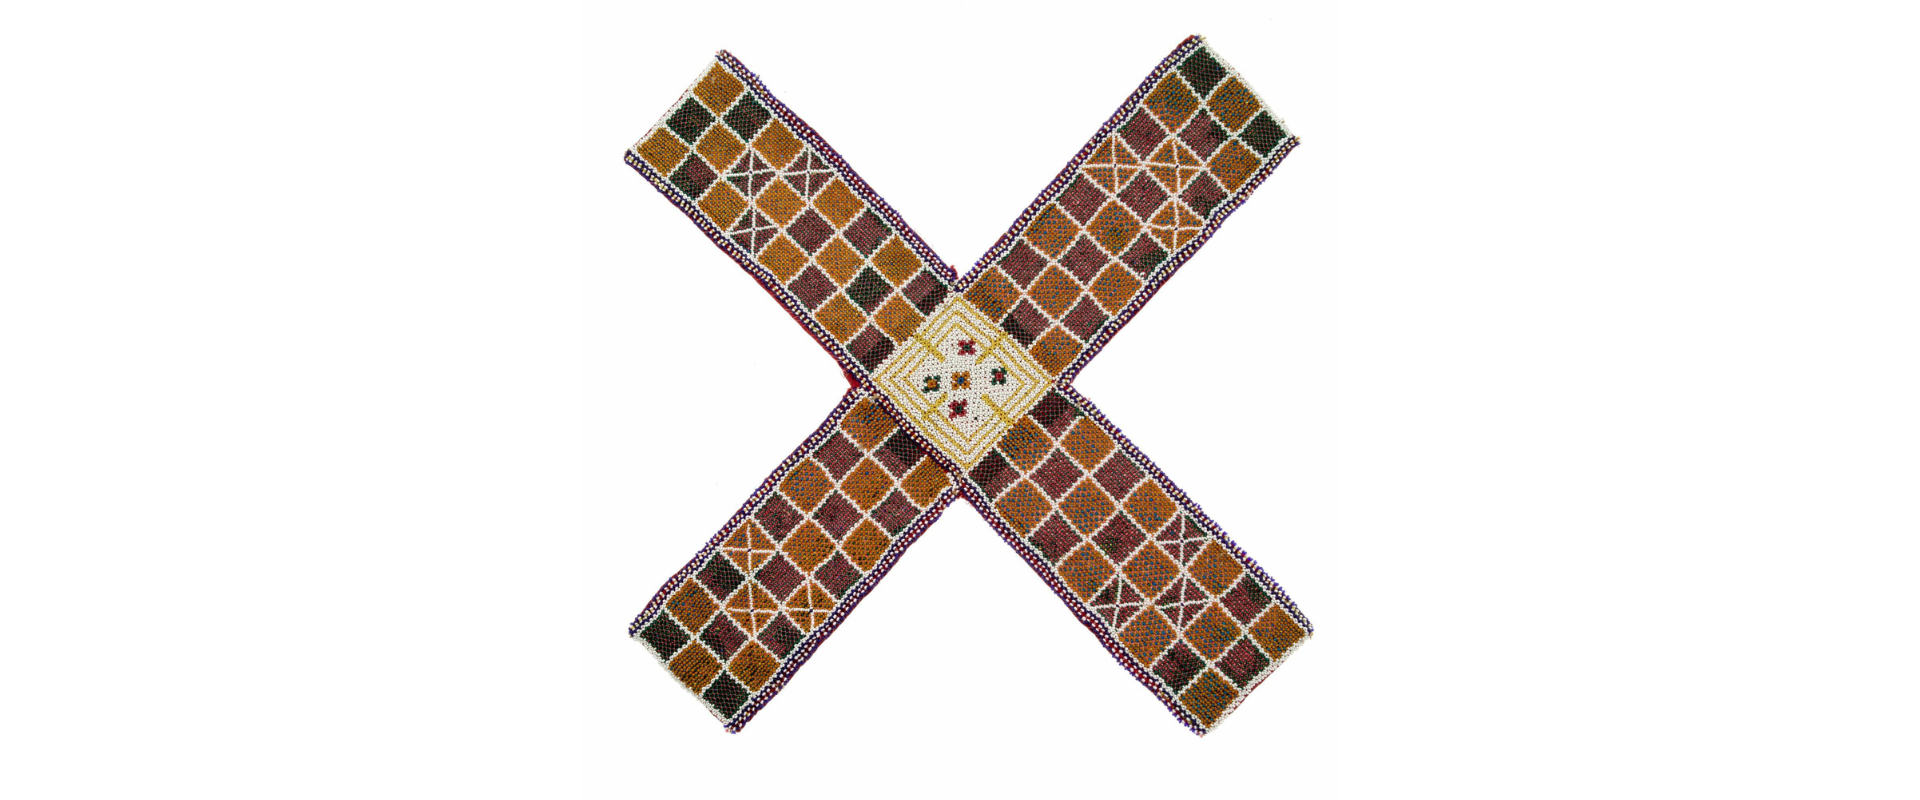 Game board for chaupar or patchisi, part of set, checquered, glass beads, gold leaf in oranges and yellows.